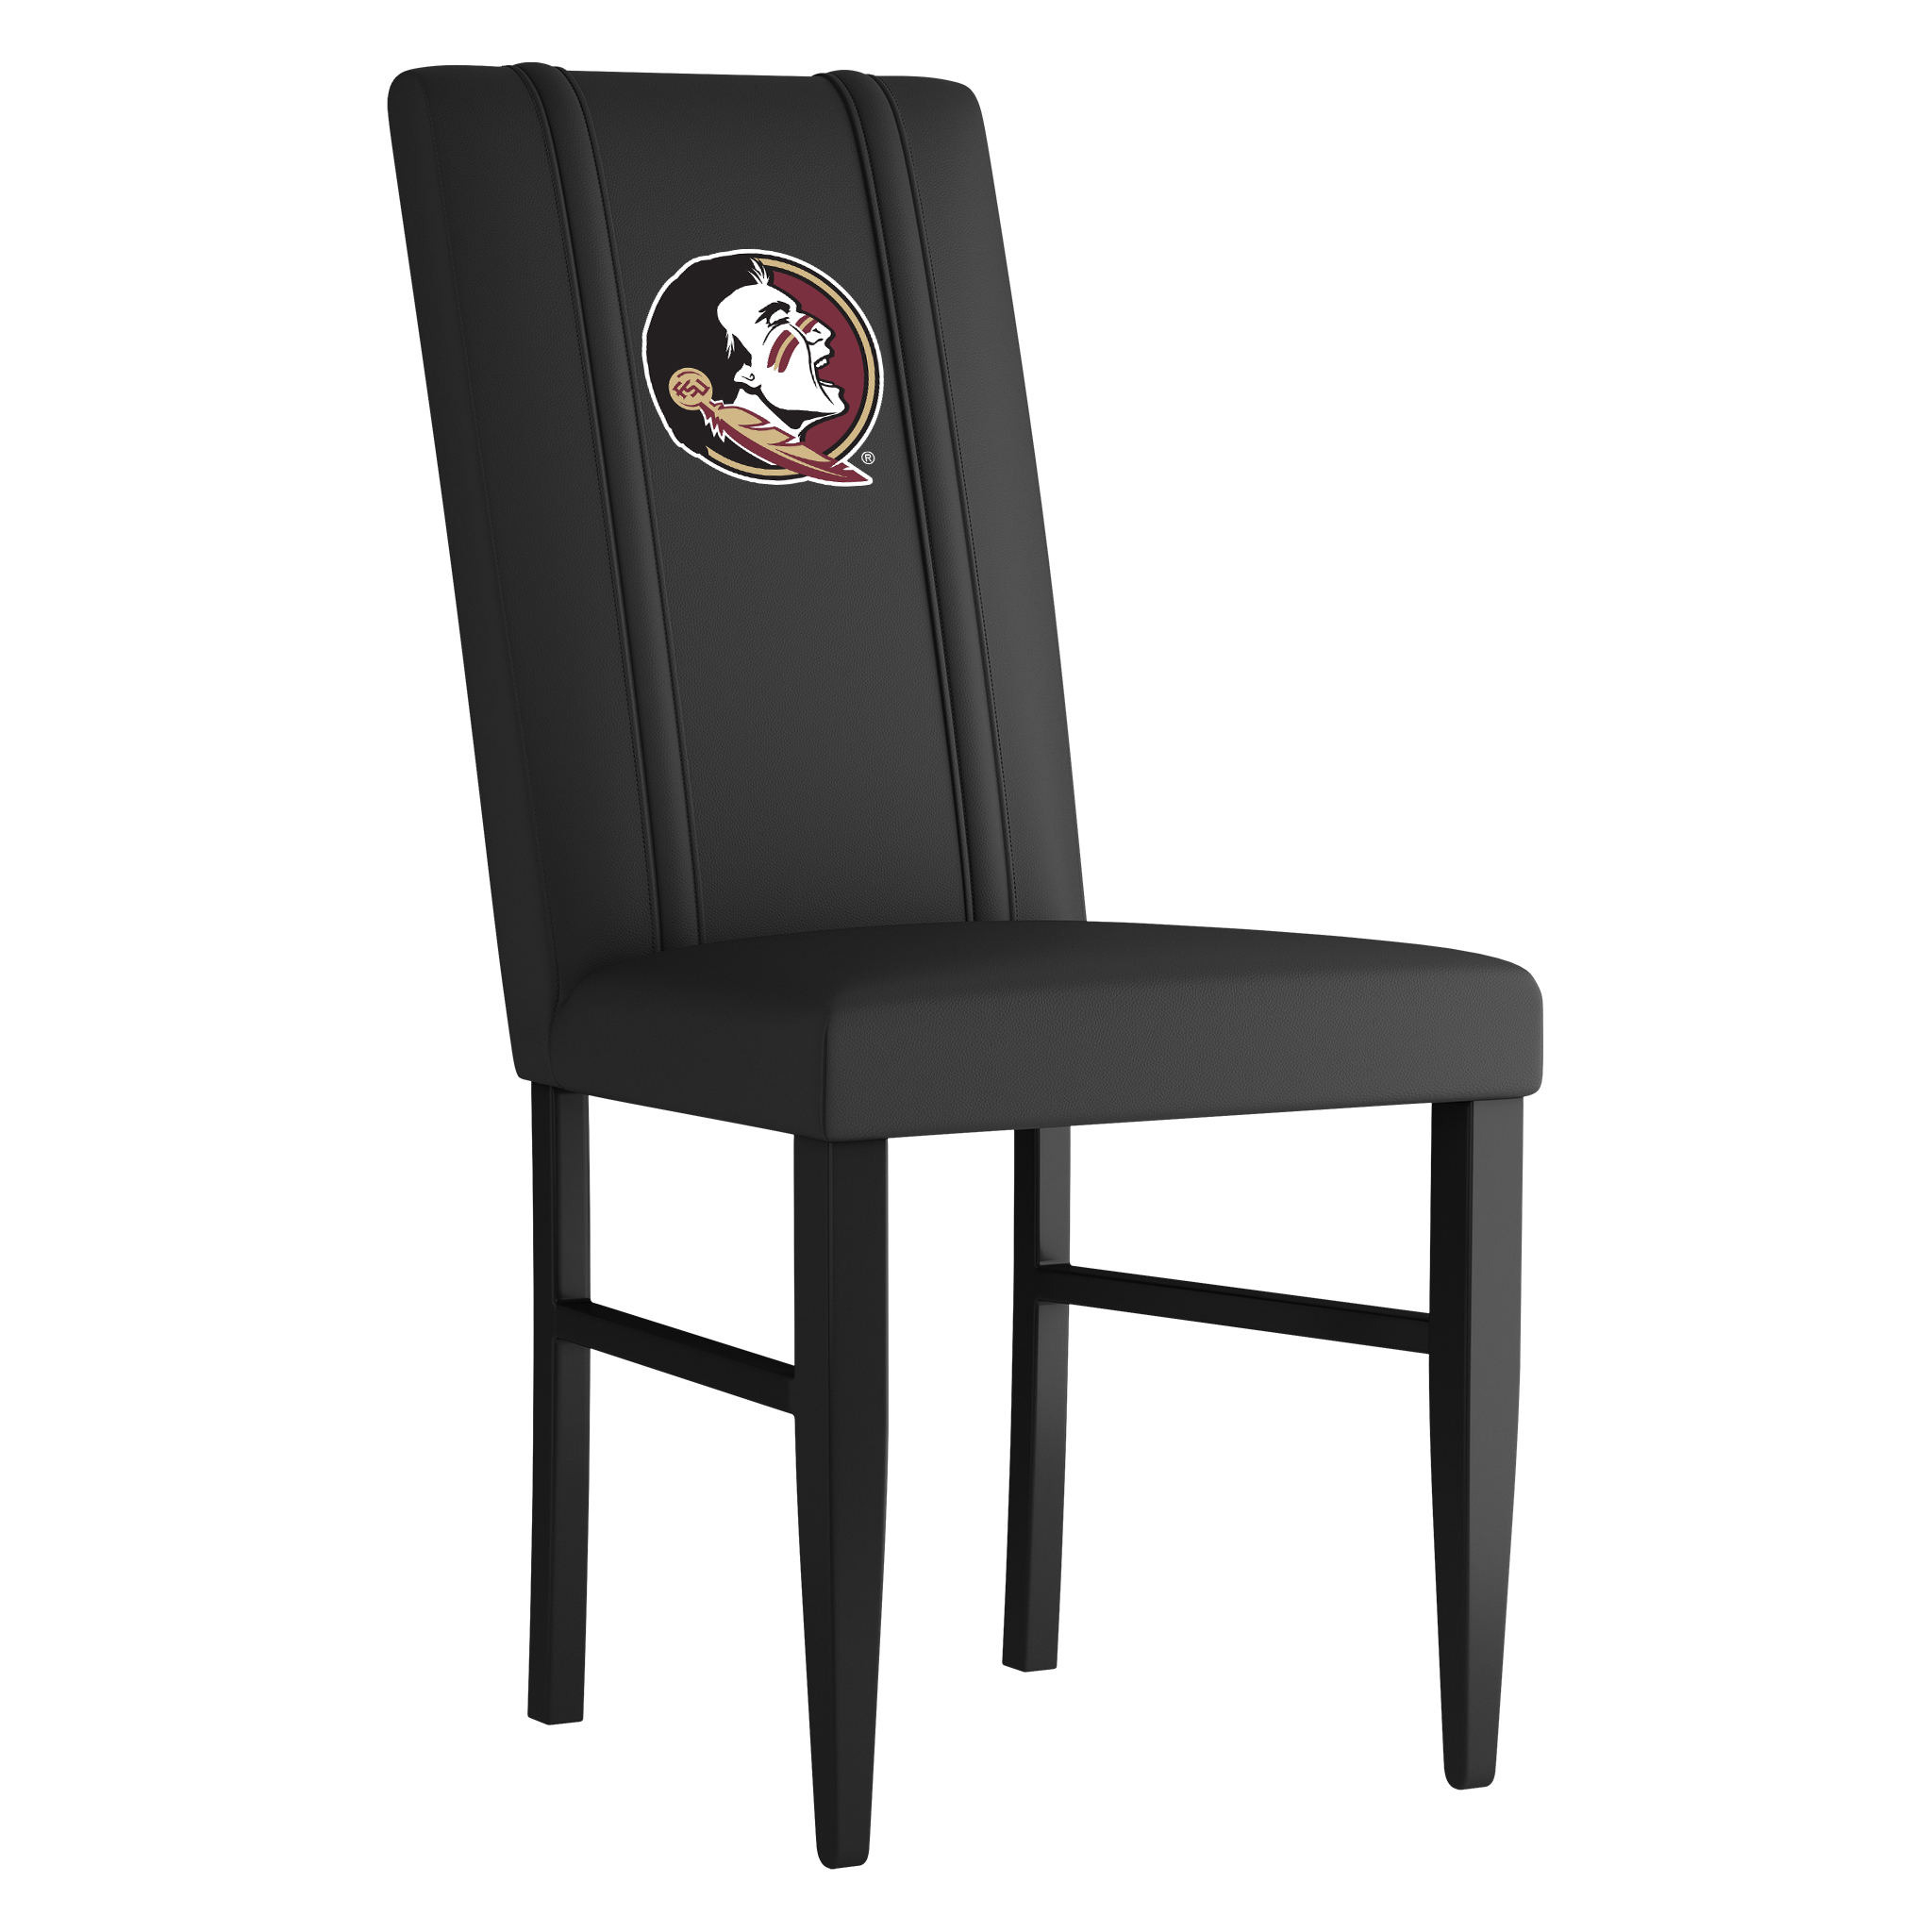 Florida State Seminoles Side Chair 2000 With Florida State Seminoles Logo Panel